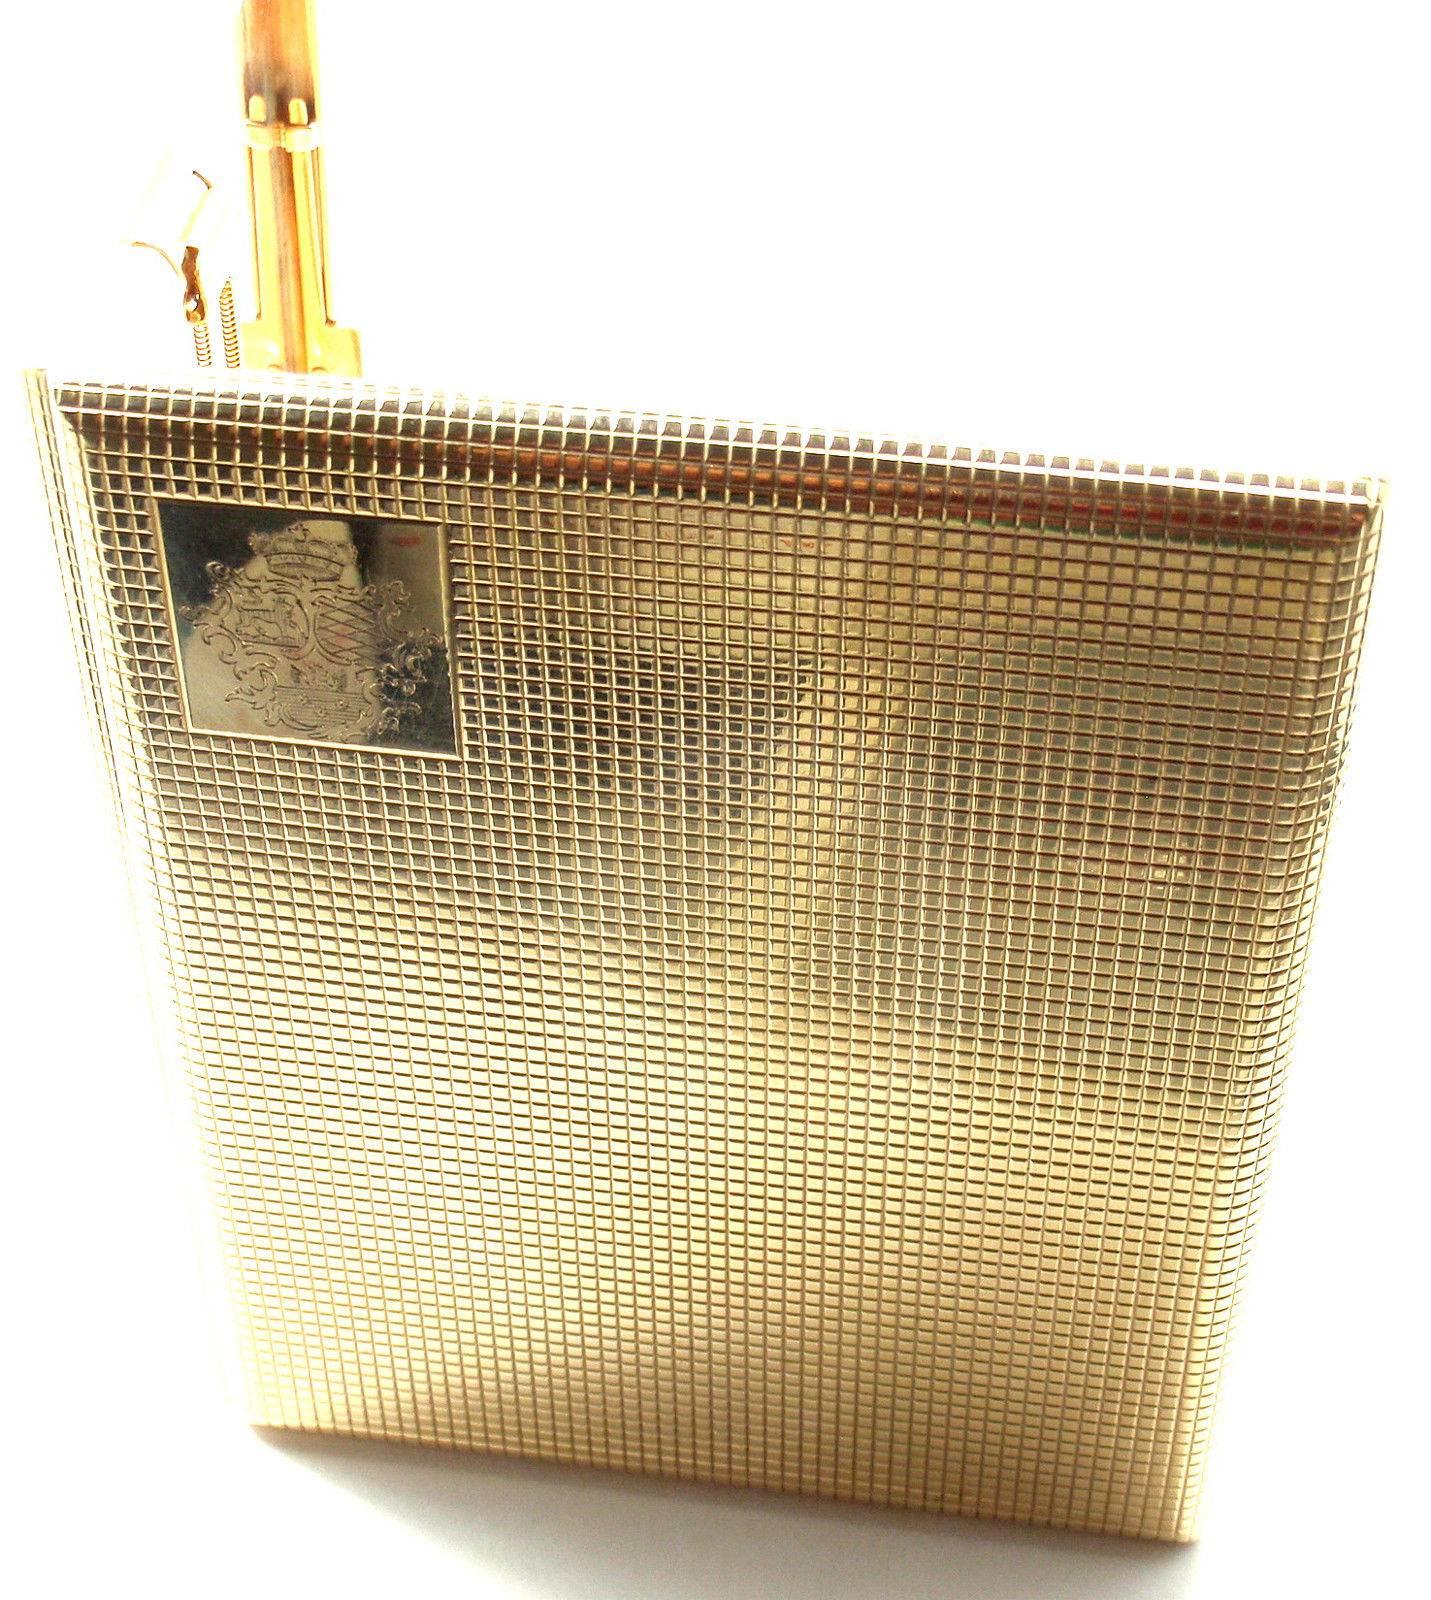 375 9k Yellow Gold Cigarette Case Holder Box. 

Details: 
Measurements: 4" x 3 1/4"
Weight: 132.5 grams
Stamped Hallmarks: 4 9 375 S 

*Free Shipping within the United States*  
Your Price: $6,000
T337toed